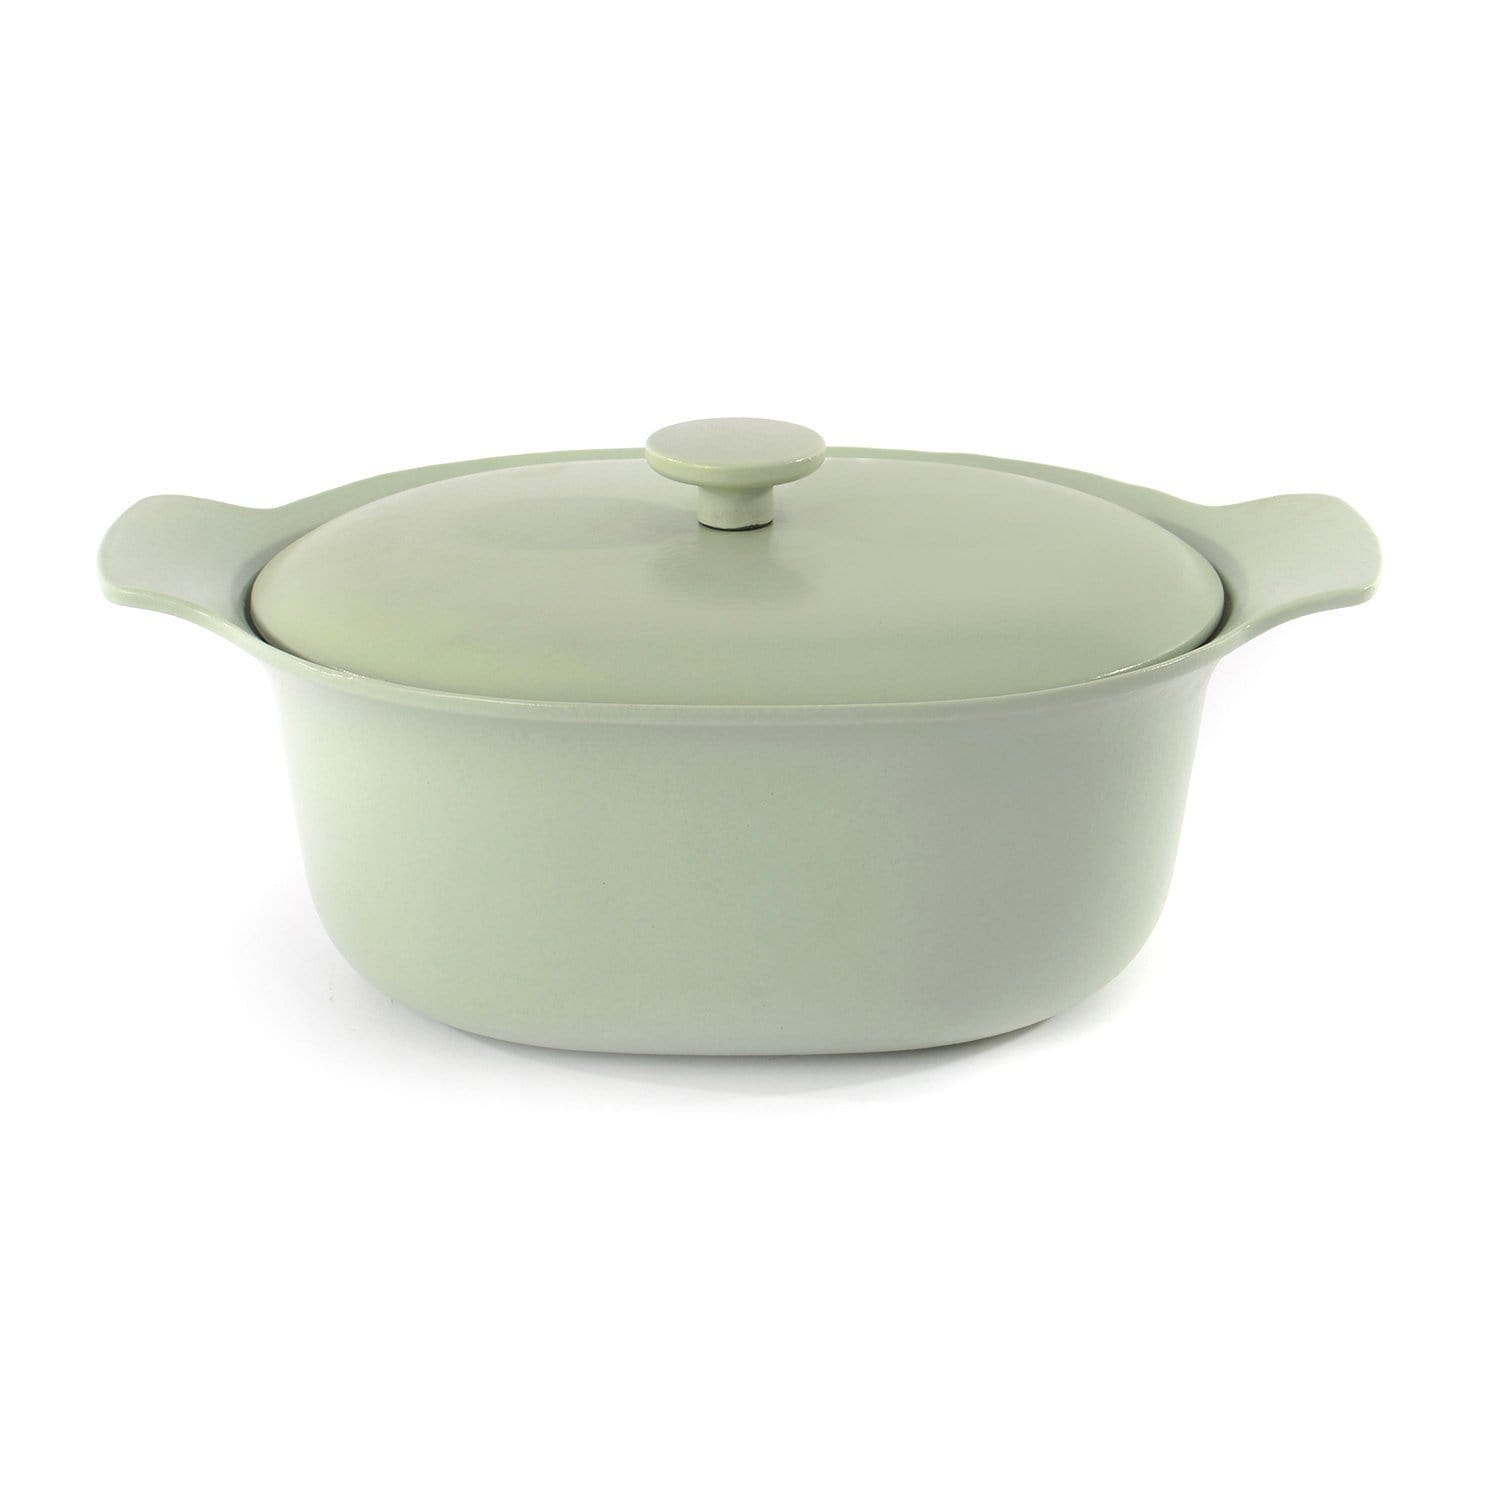 BergHOFF Ron Covered Oval Casserole - Light Green - 3900044 - Jashanmal Home